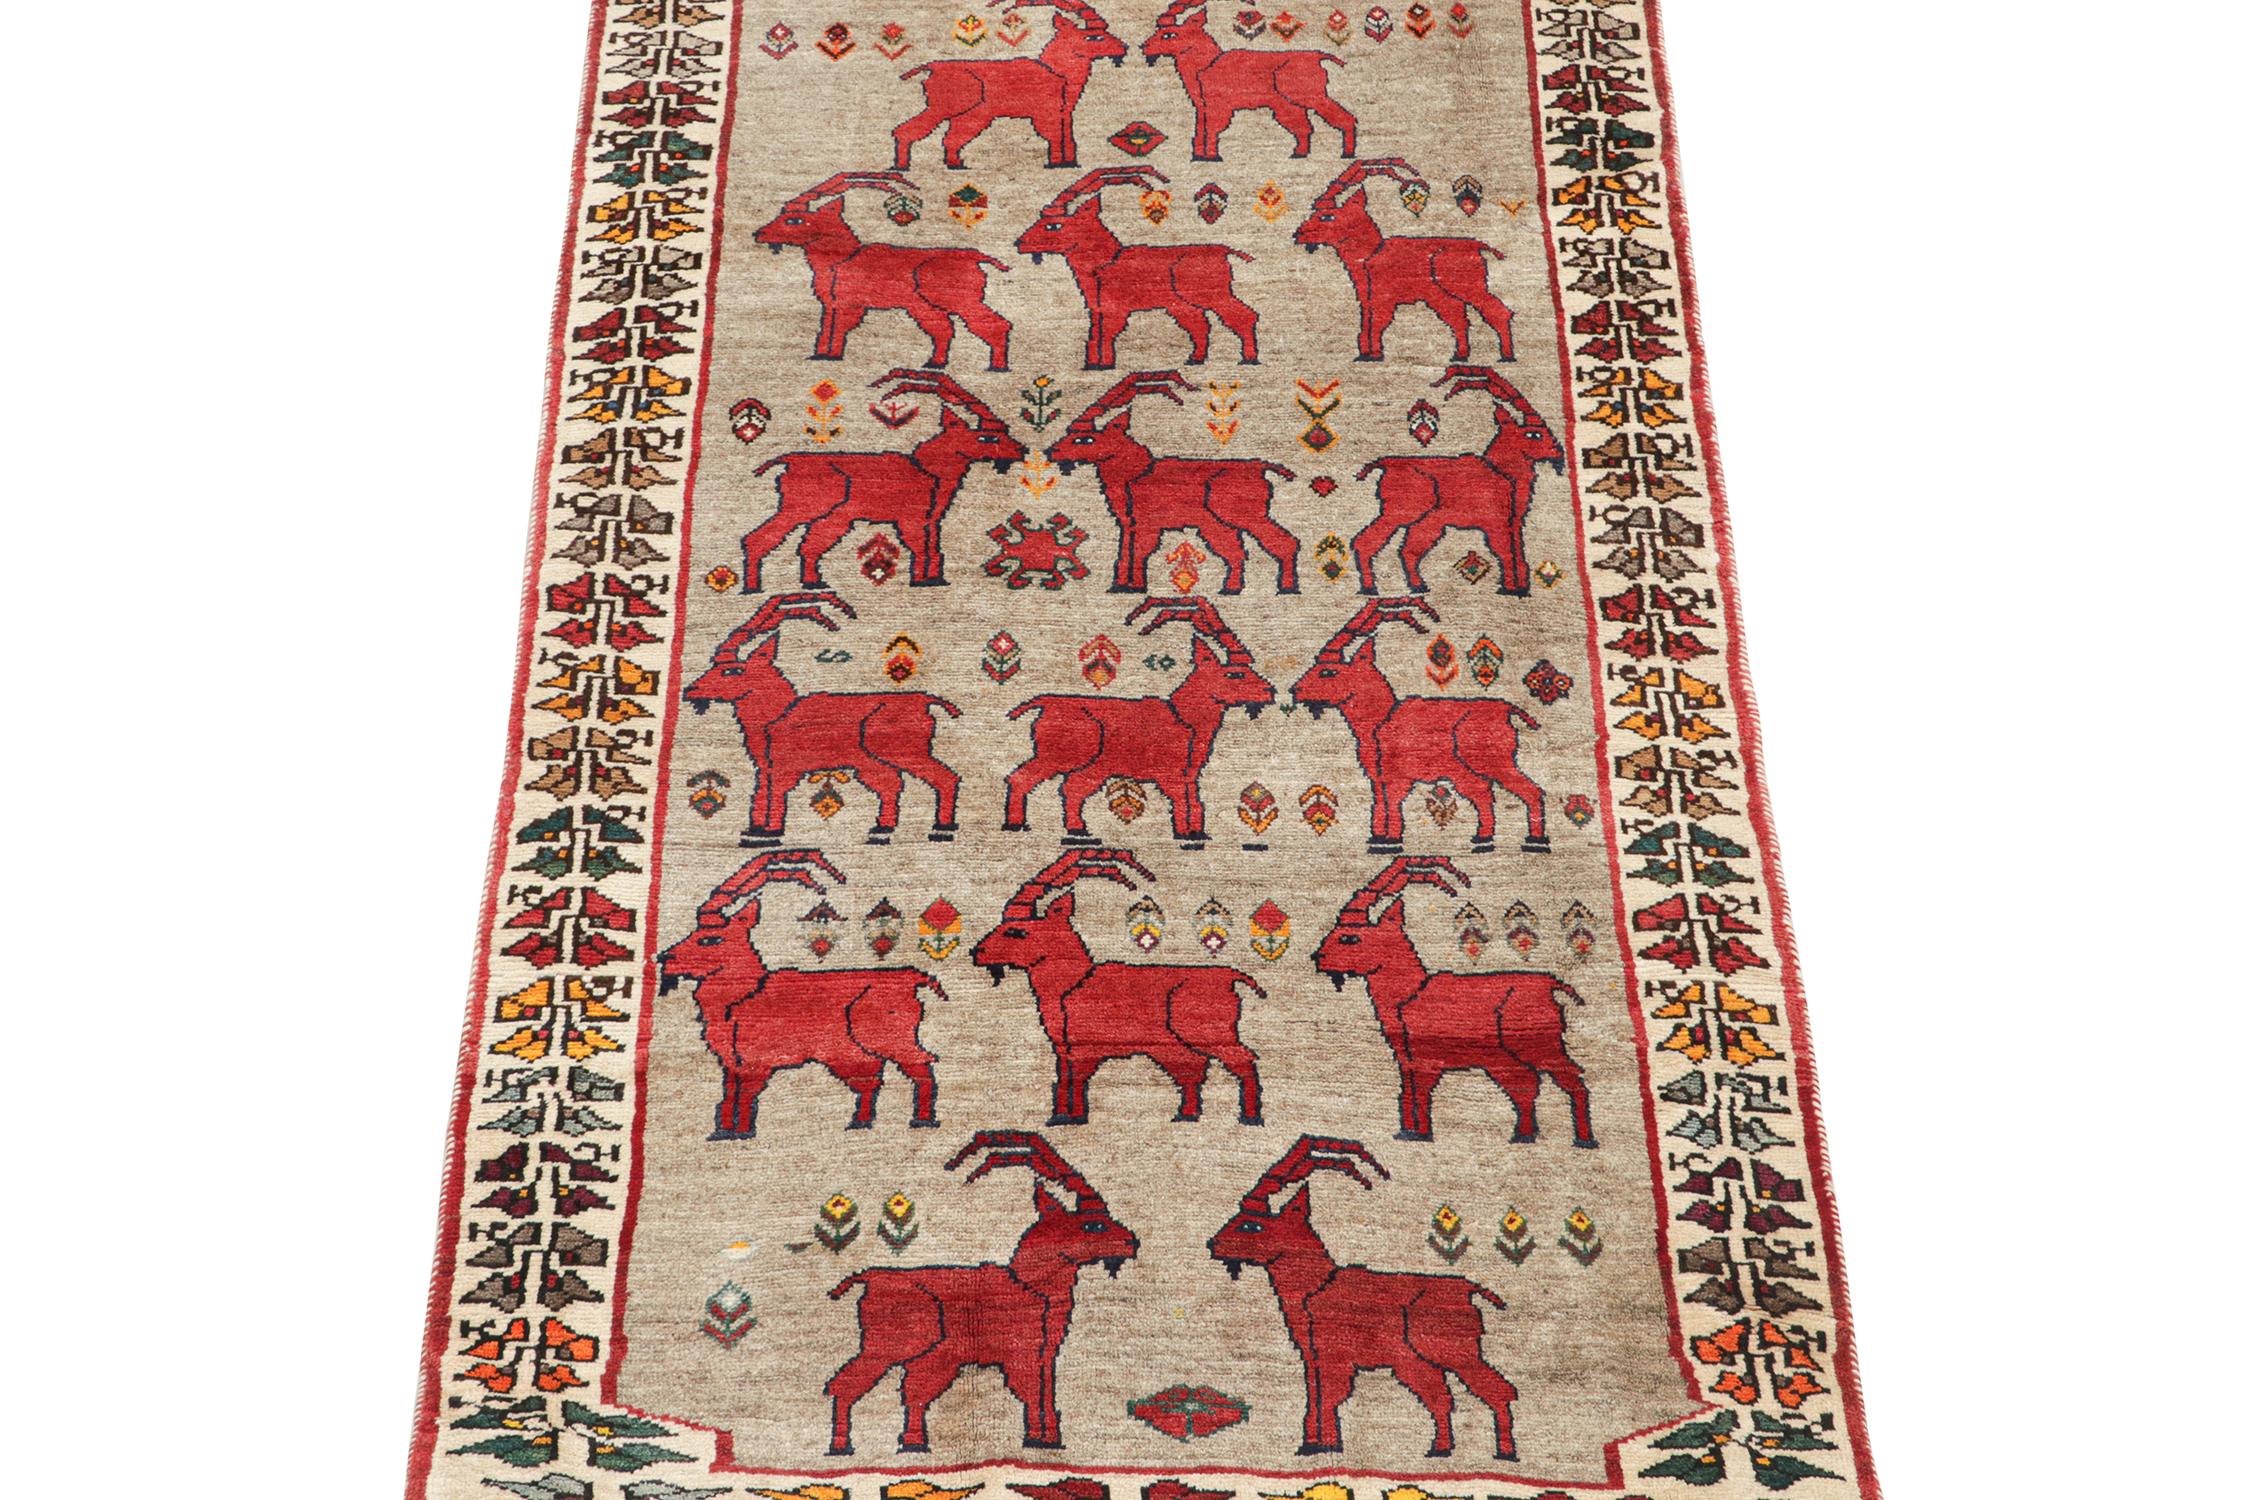 This vintage 4x8 Persian rug is a rare new addition to Rug & Kilim’s collection. Hand-knotted in wool, it originates circa 1950-1960. 

Connoisseurs will admire this as a collectible work of nomadic, primitivist folk art by tribal weavers of the